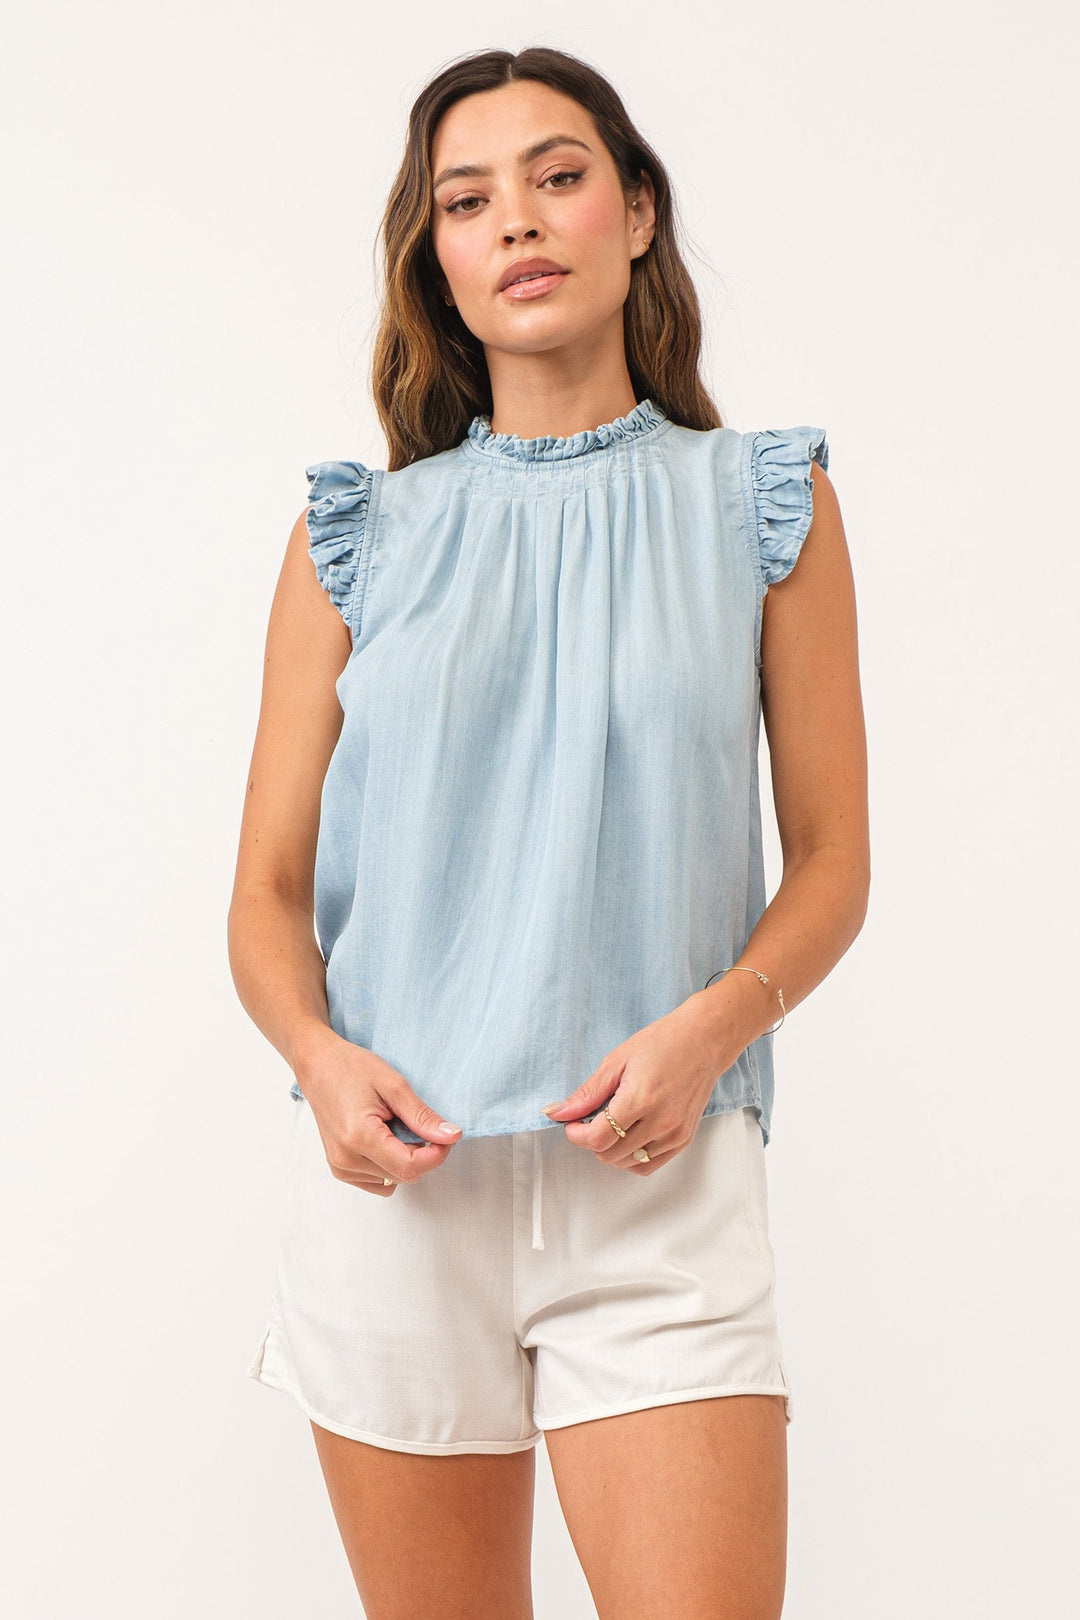 clarin-back-placket-top-perfect-blue